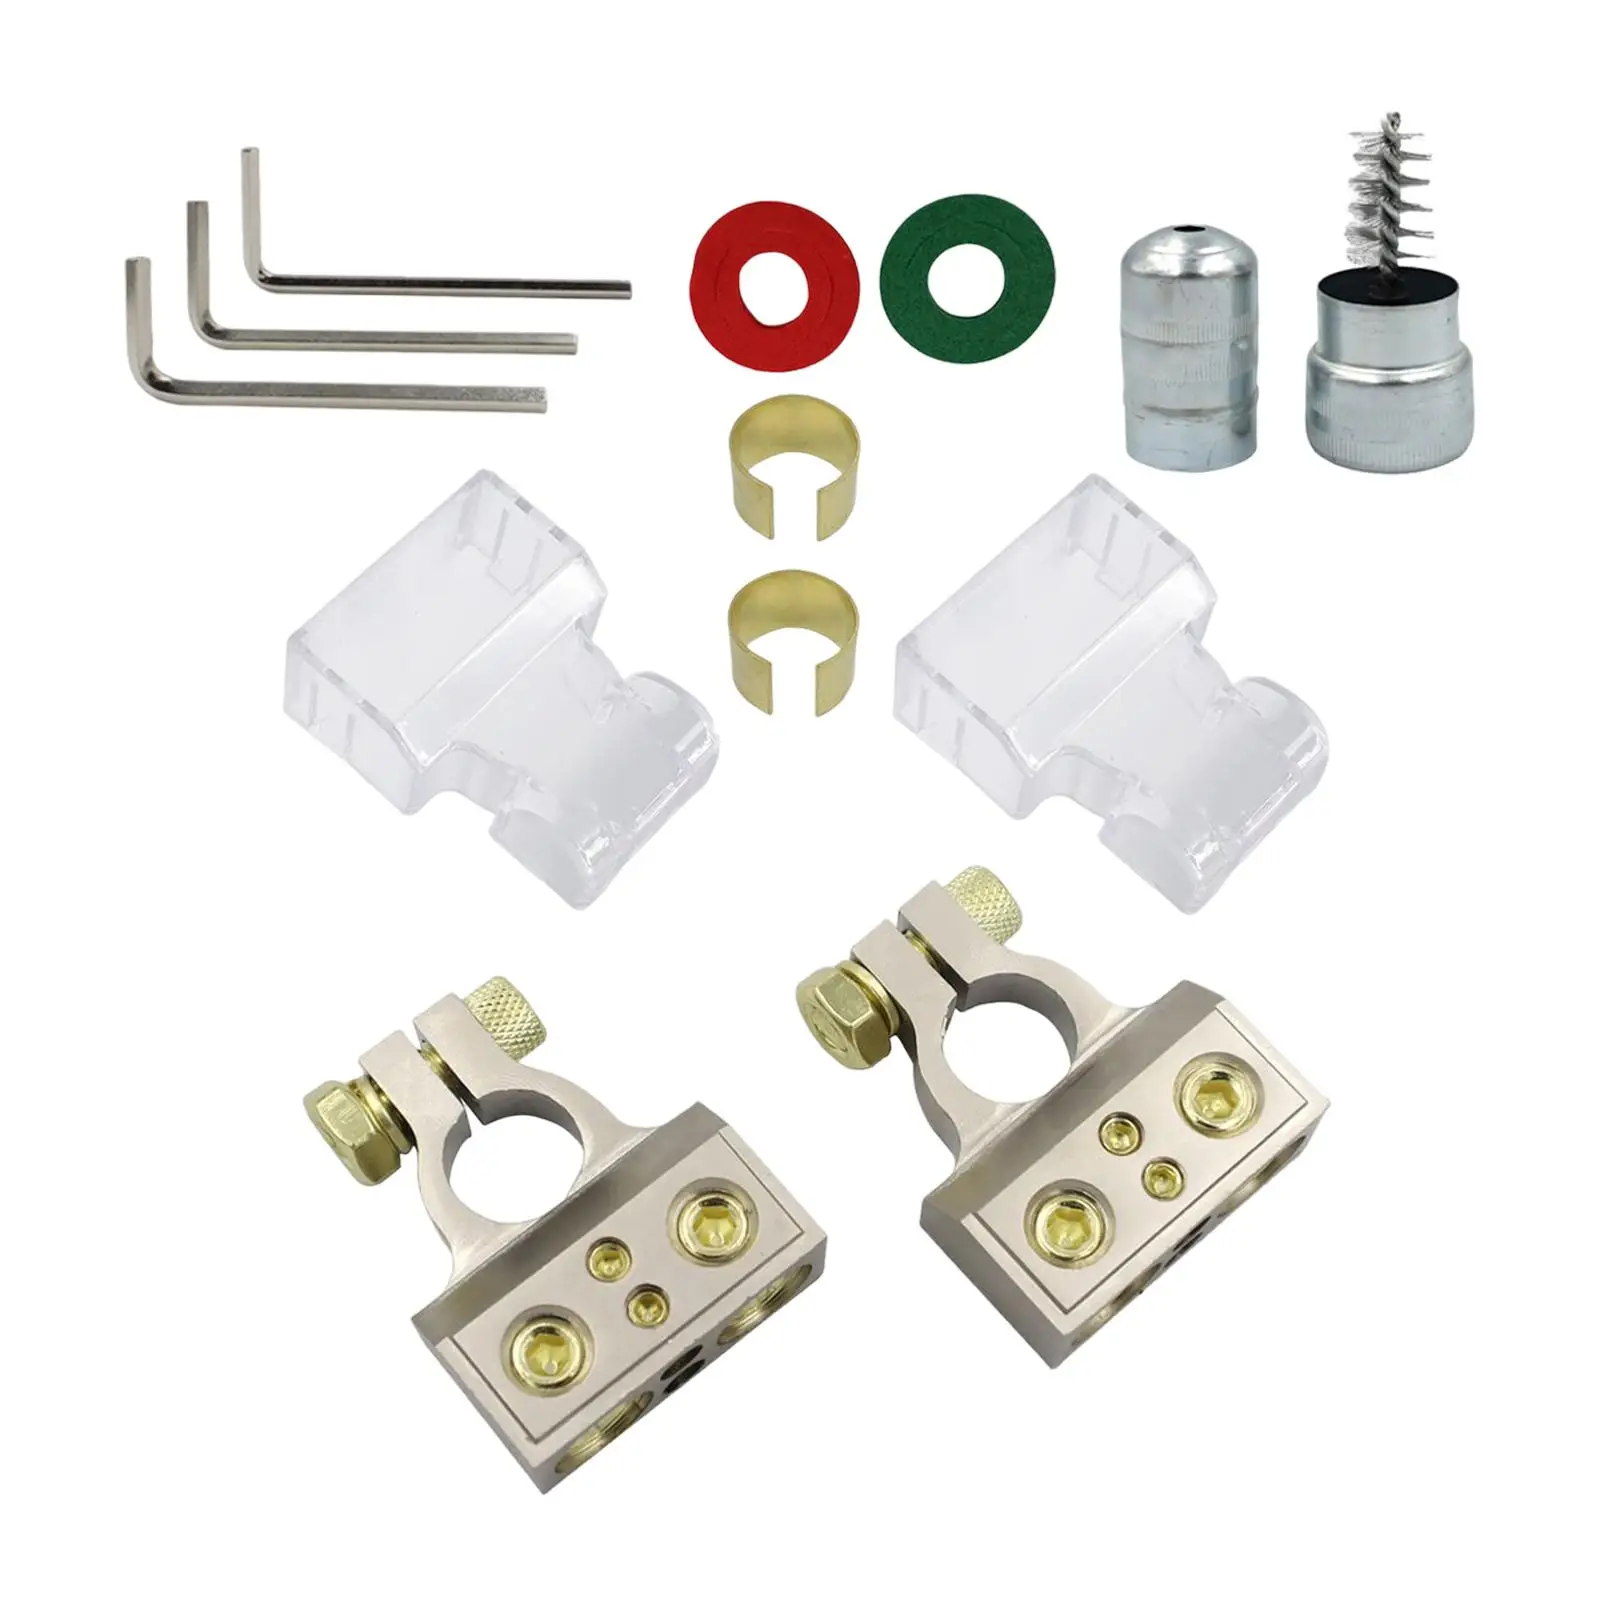 Battery Terminal Connector Kits with Cleaning Brush with Washers for Bus Widely Use Direct Replaces Easy to Install